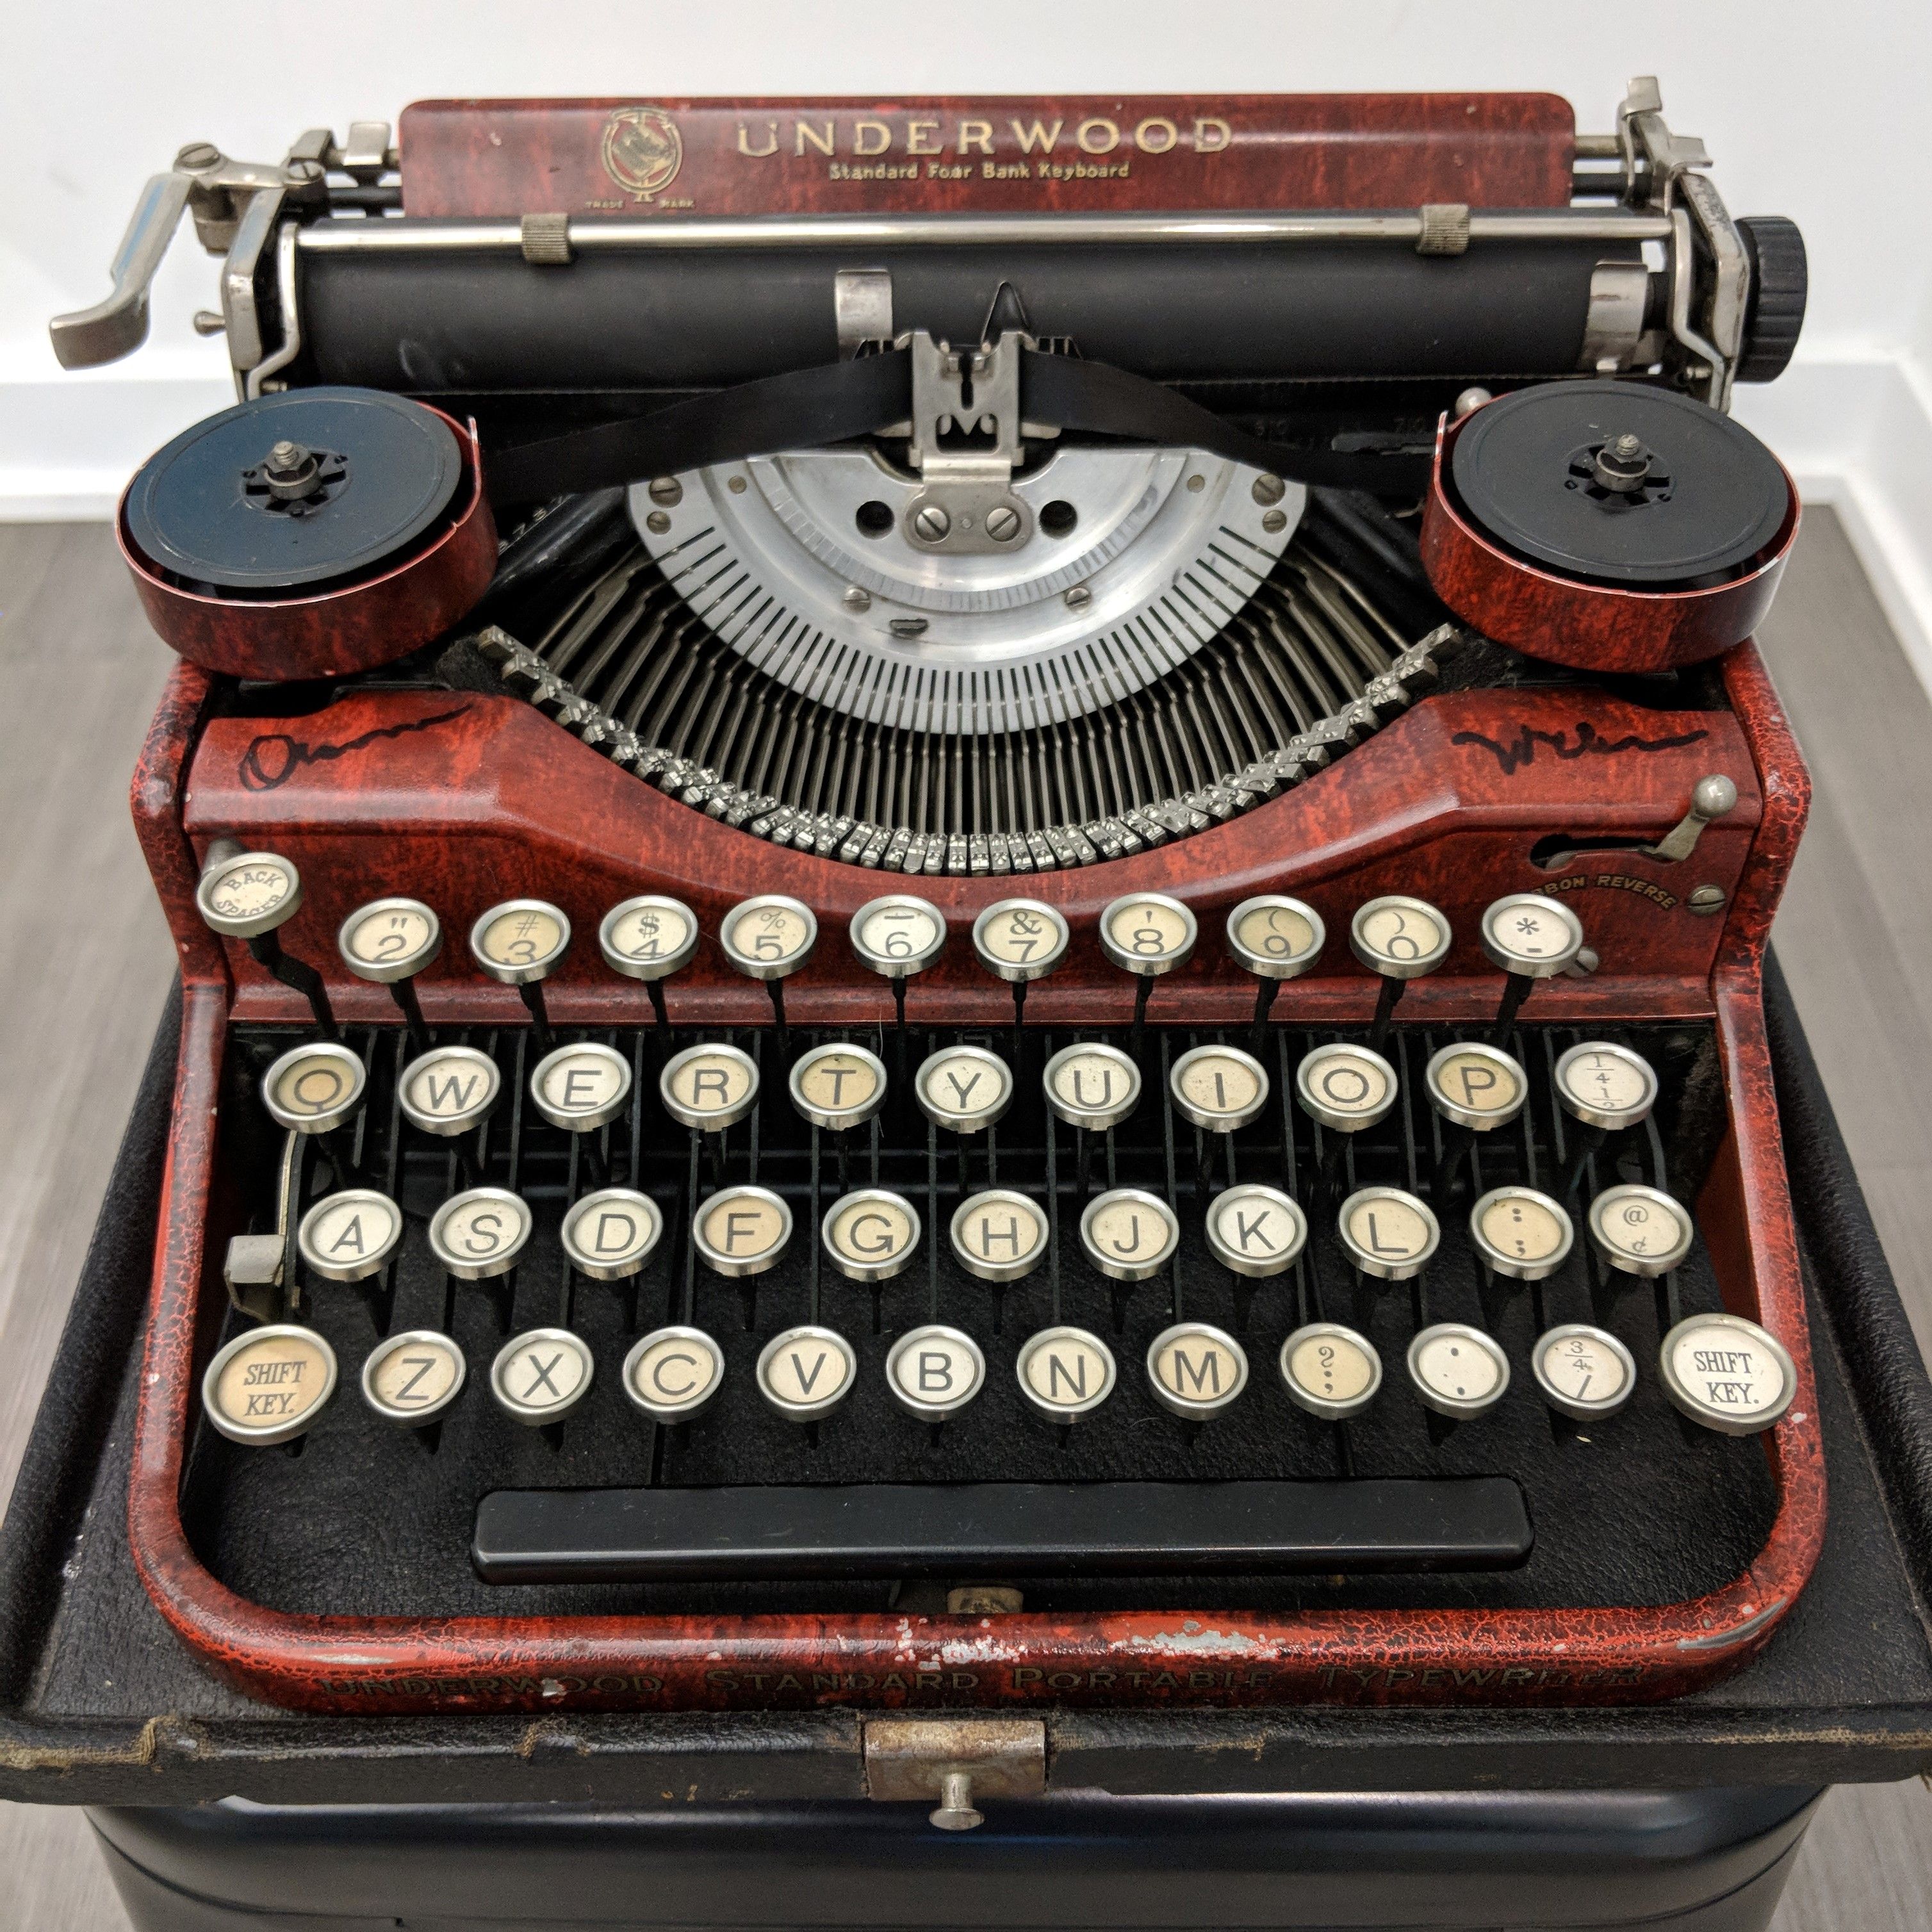 The typewriter used by Orson Welles now on display at the American Writers Museum in Chicago.